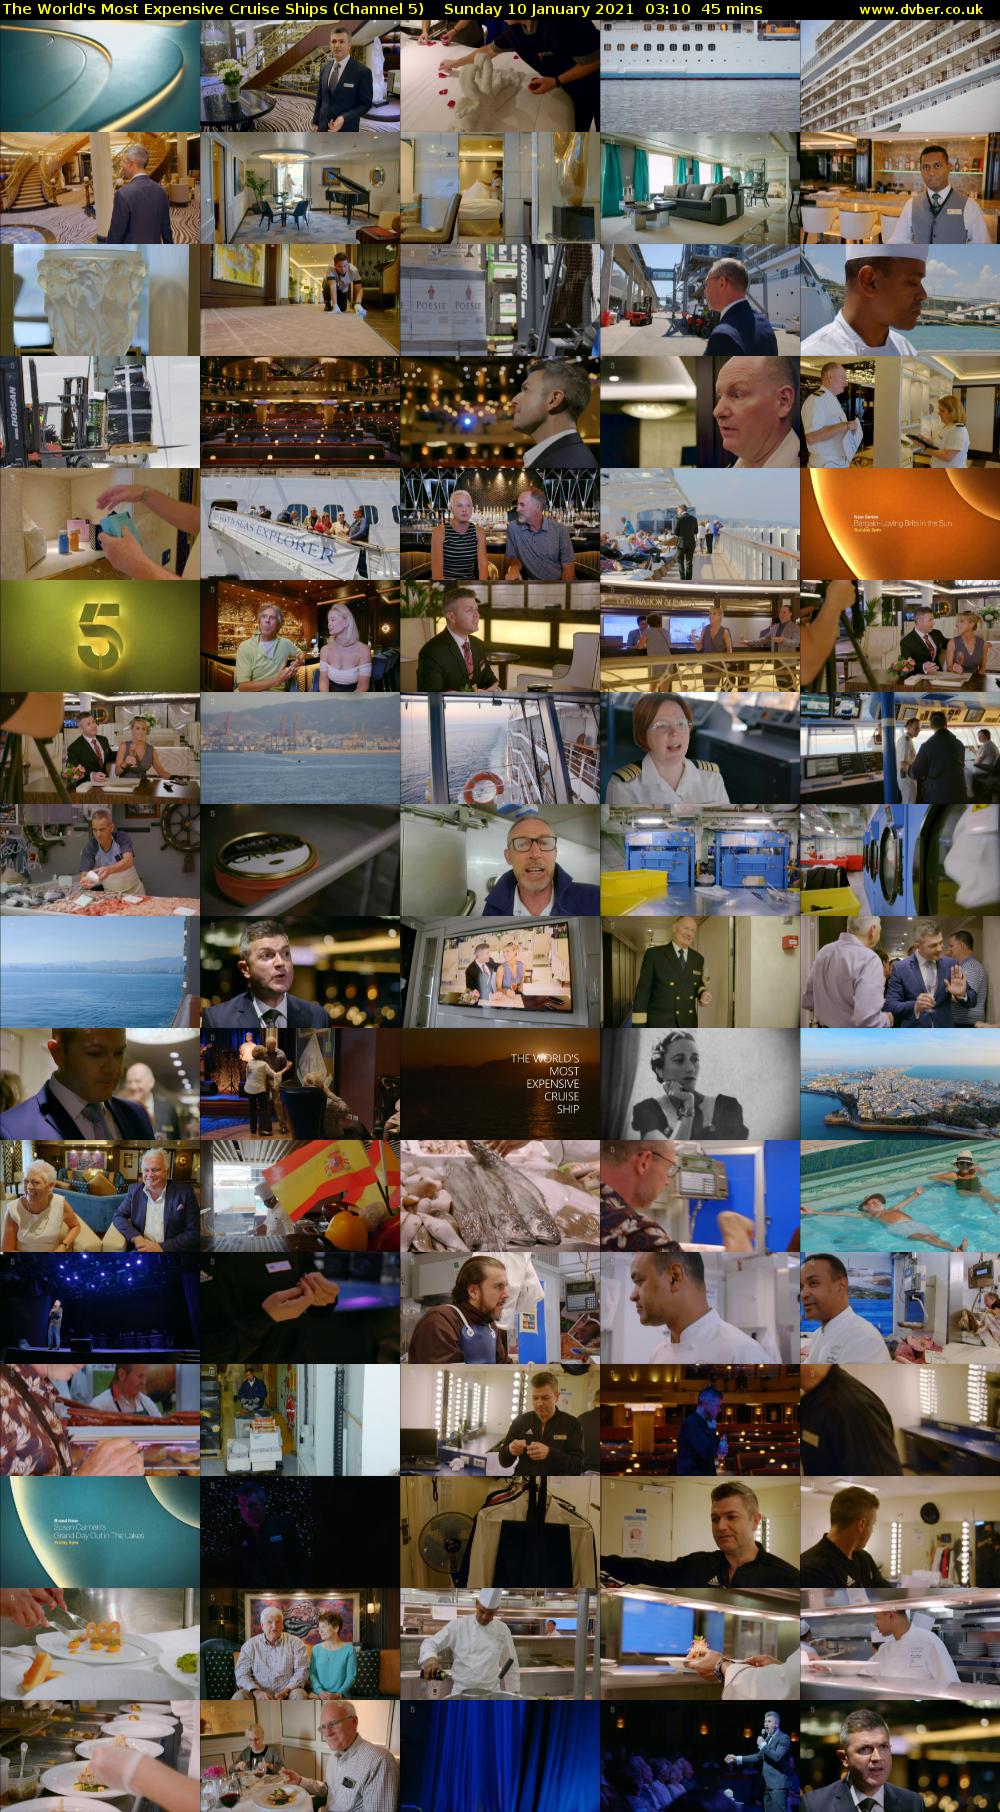 The World's Most Expensive Cruise Ships (Channel 5) Sunday 10 January 2021 03:10 - 03:55